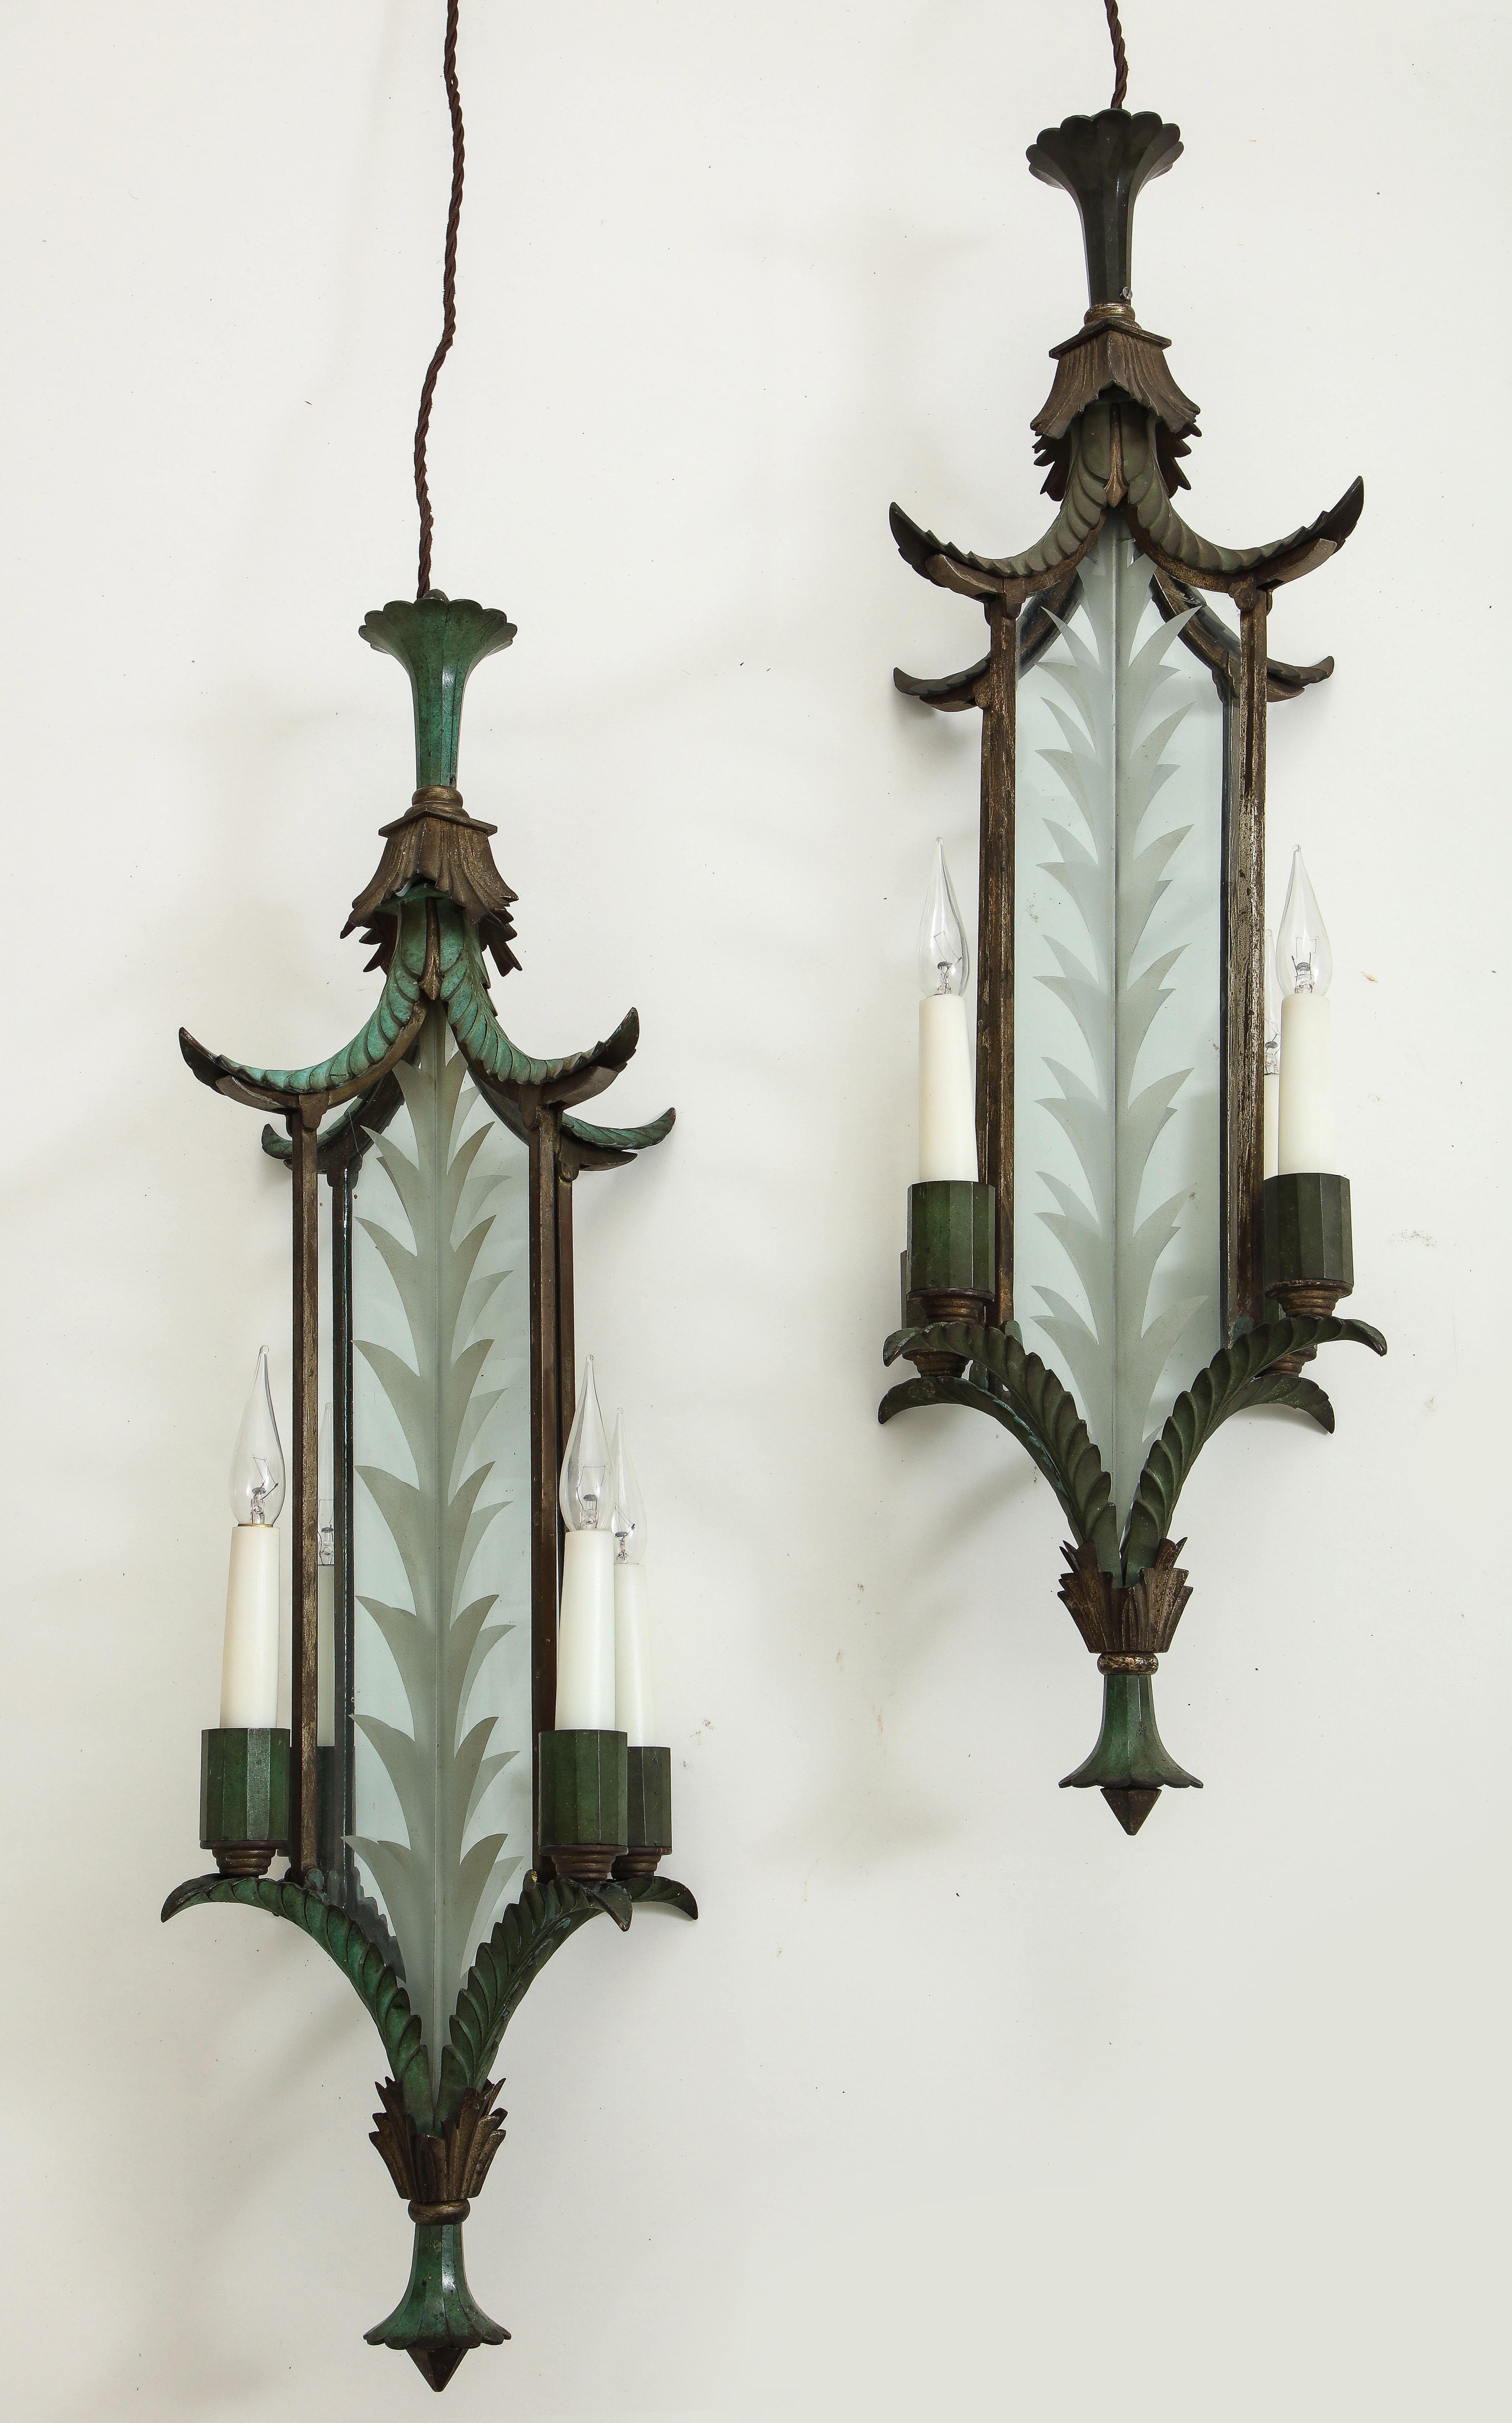 The intersecting glass panes frosted with leaves, surmounted by a foliate canopy; with four electrified candlearms.